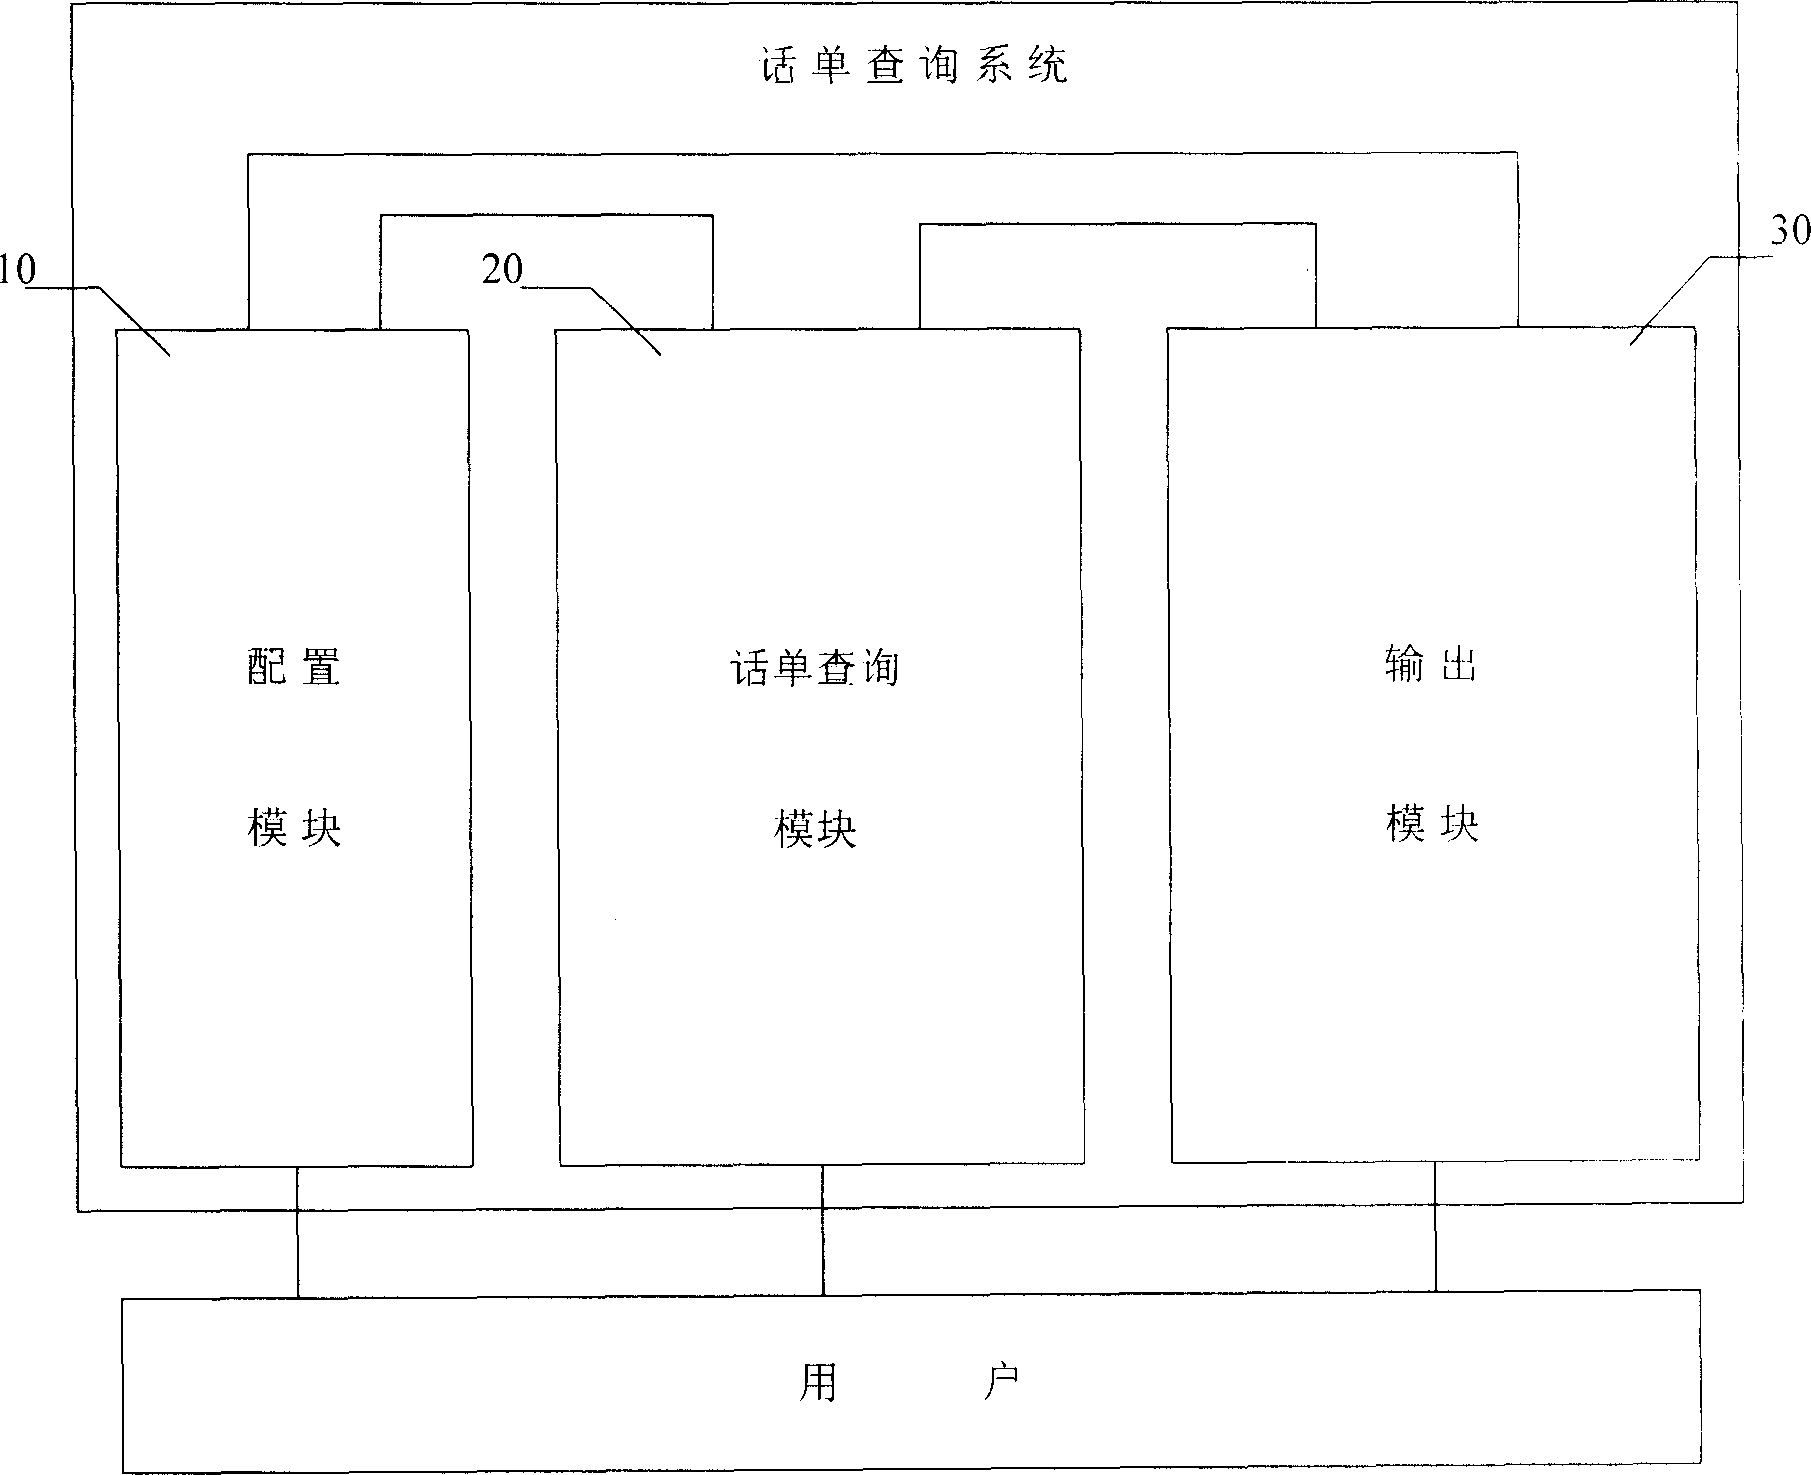 Bill checking system and method